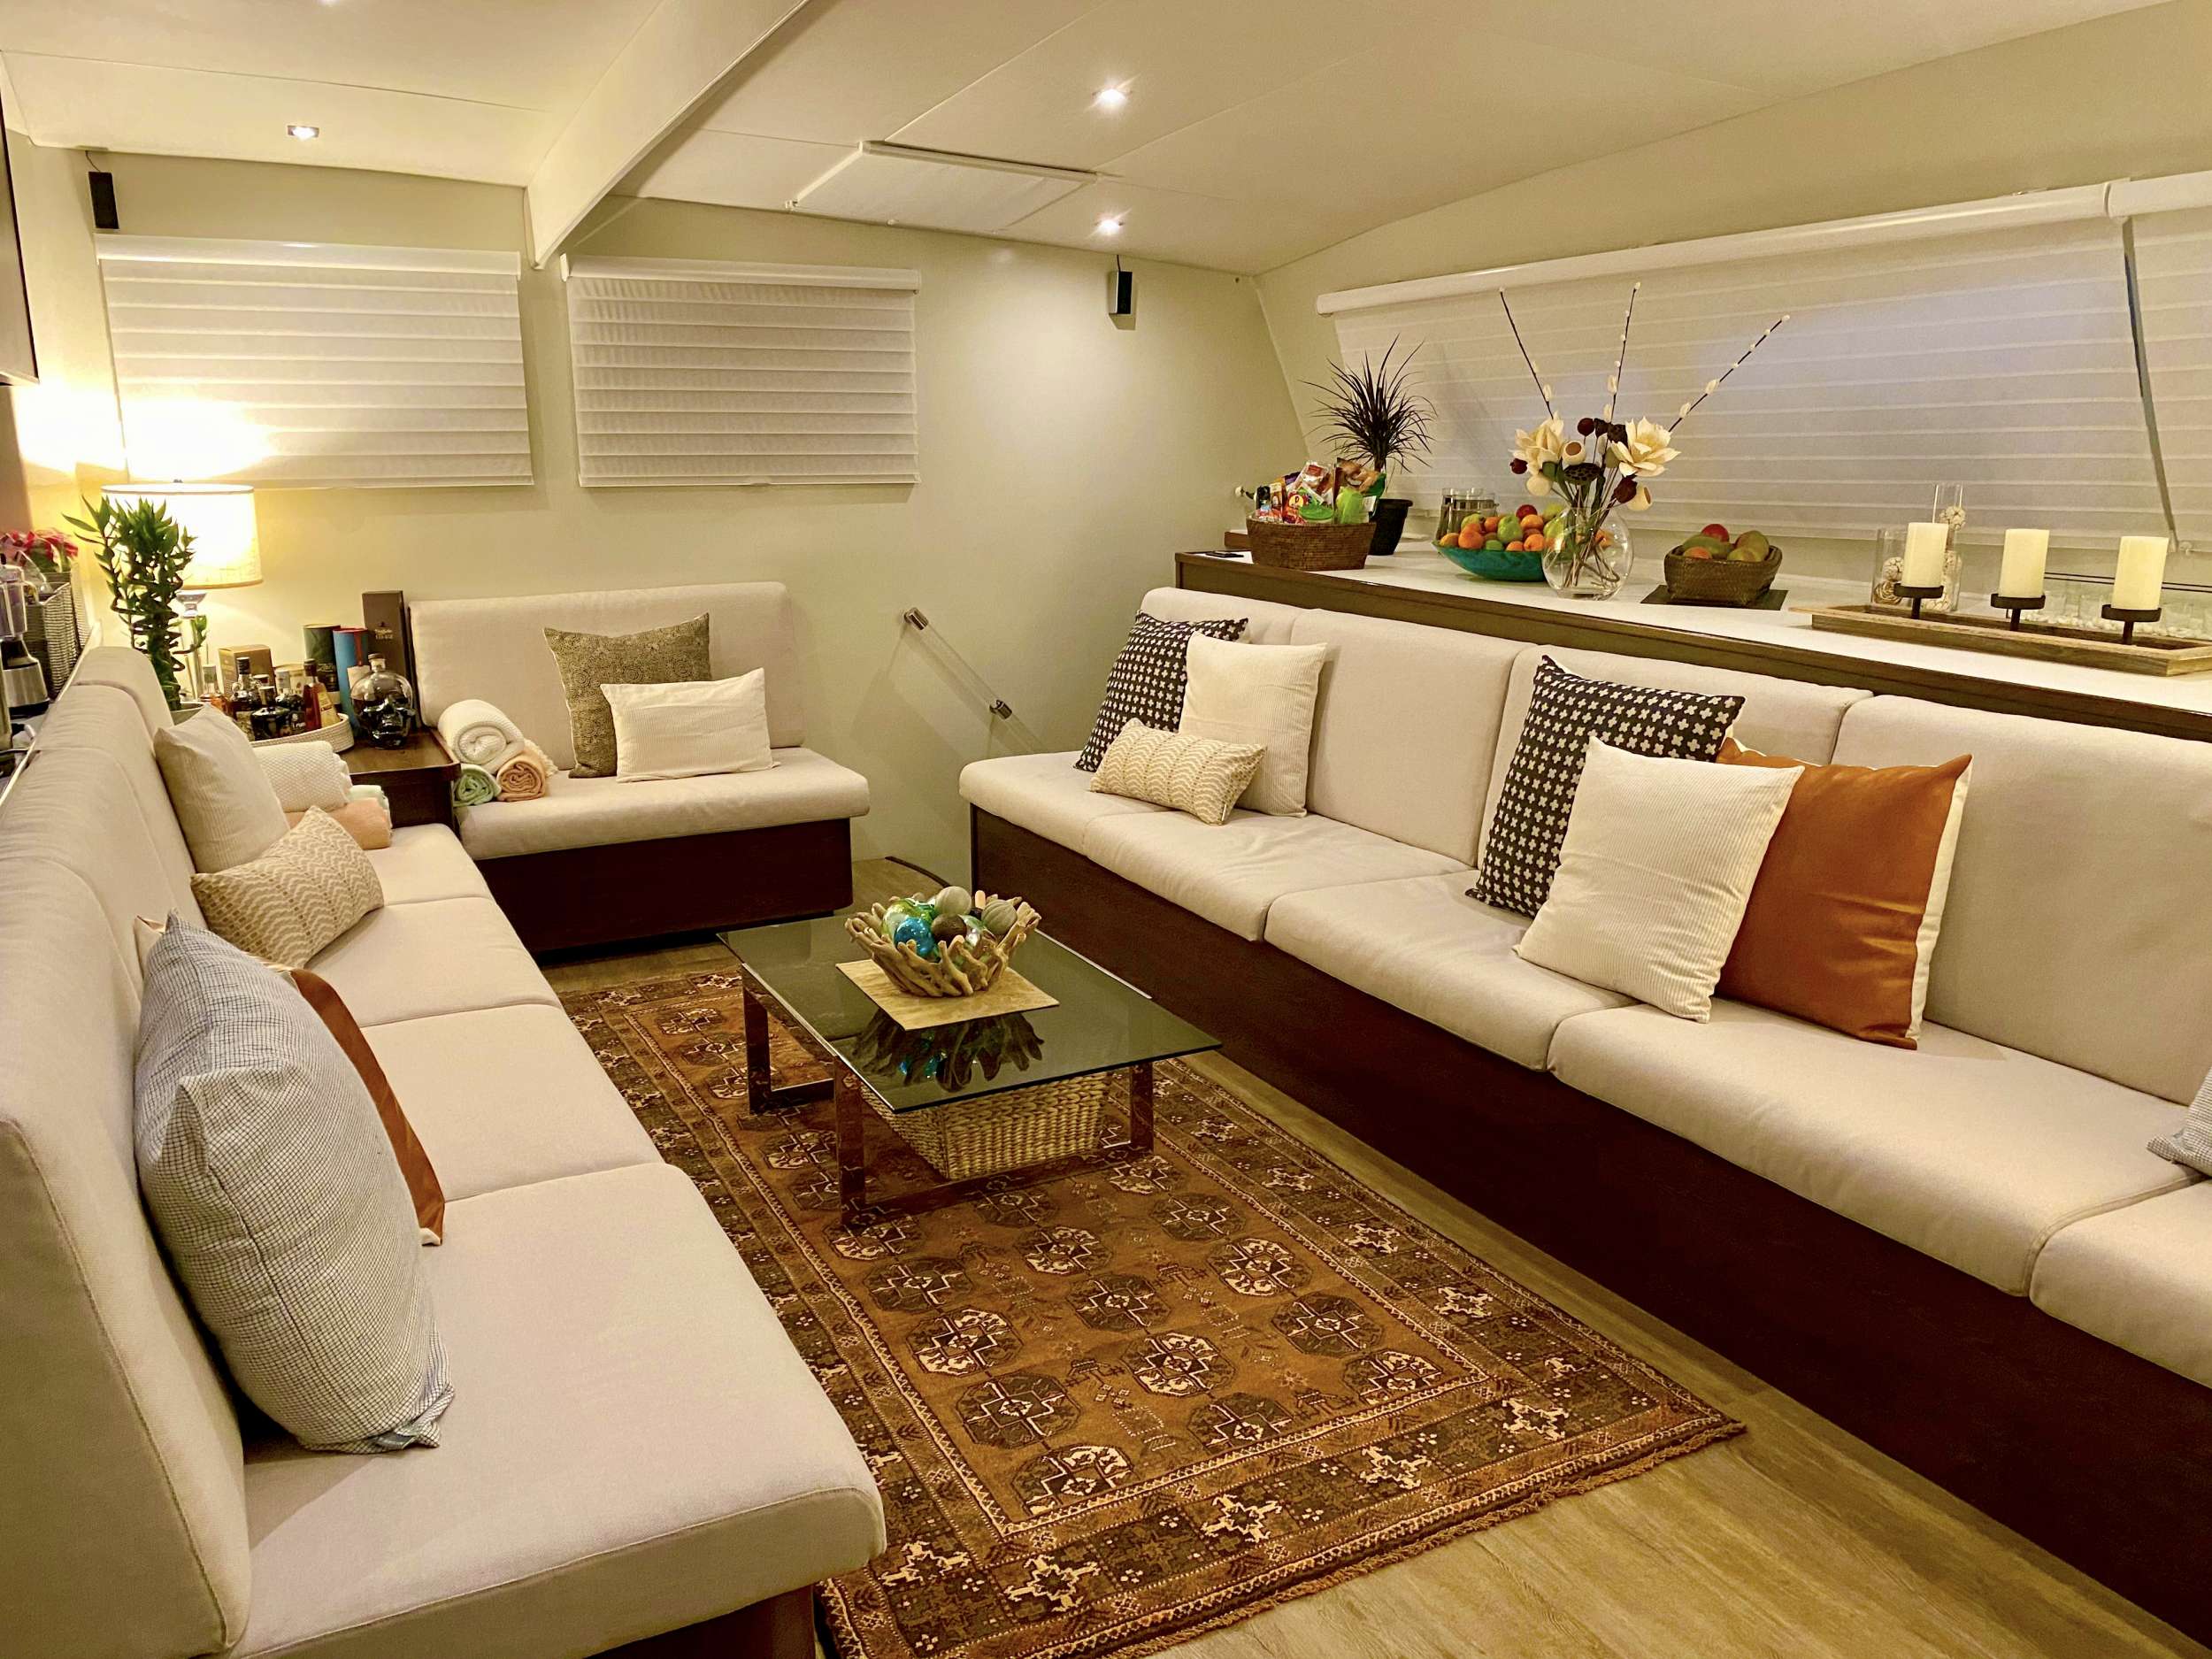 TRANQUILITY Yacht Charter - Saloon lounging area